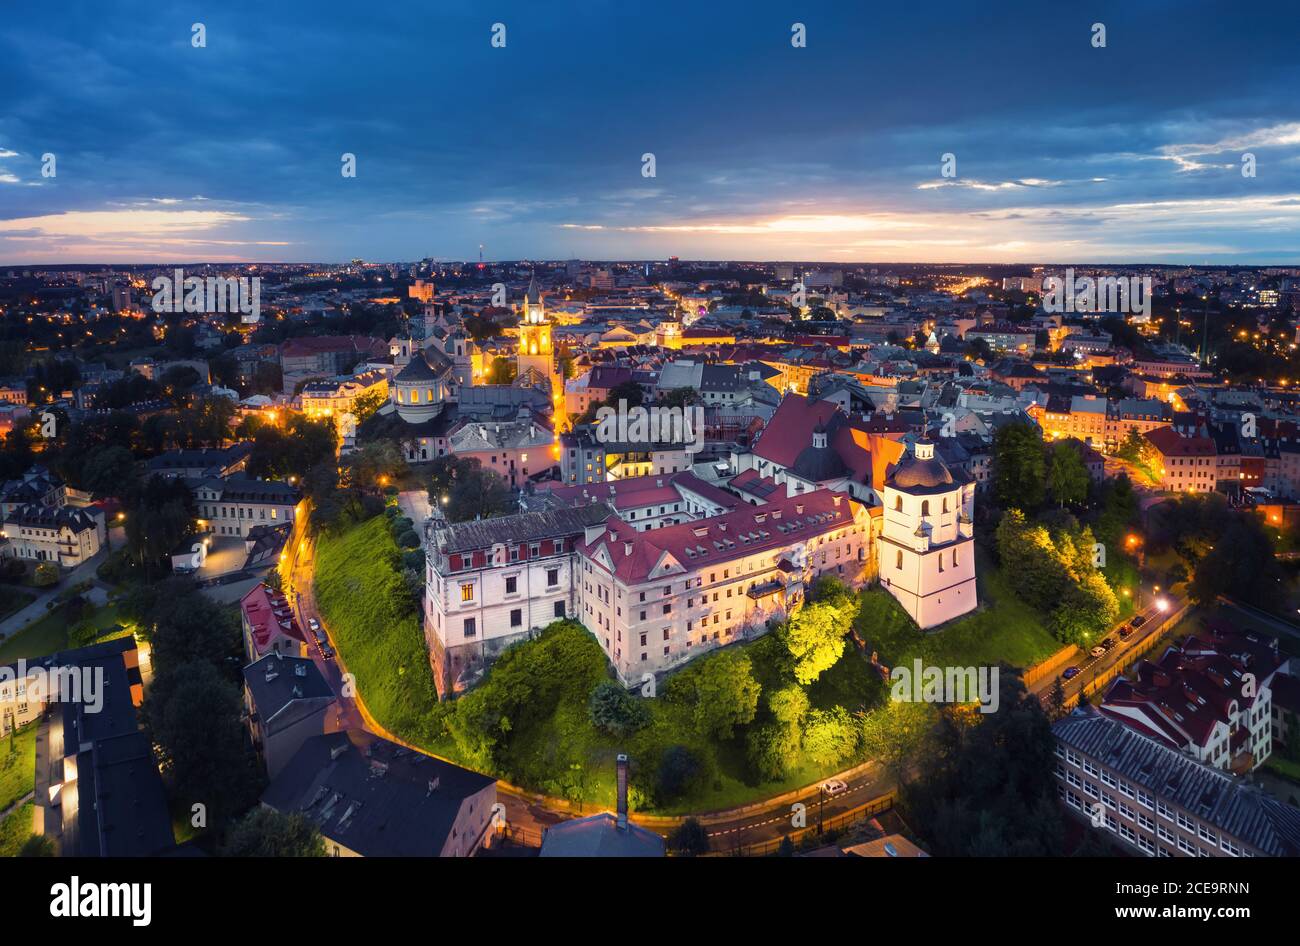 Lublin, Poland. Aerial view of Old Town at dusk with historic Dominican Abbey on foreground Stock Photo